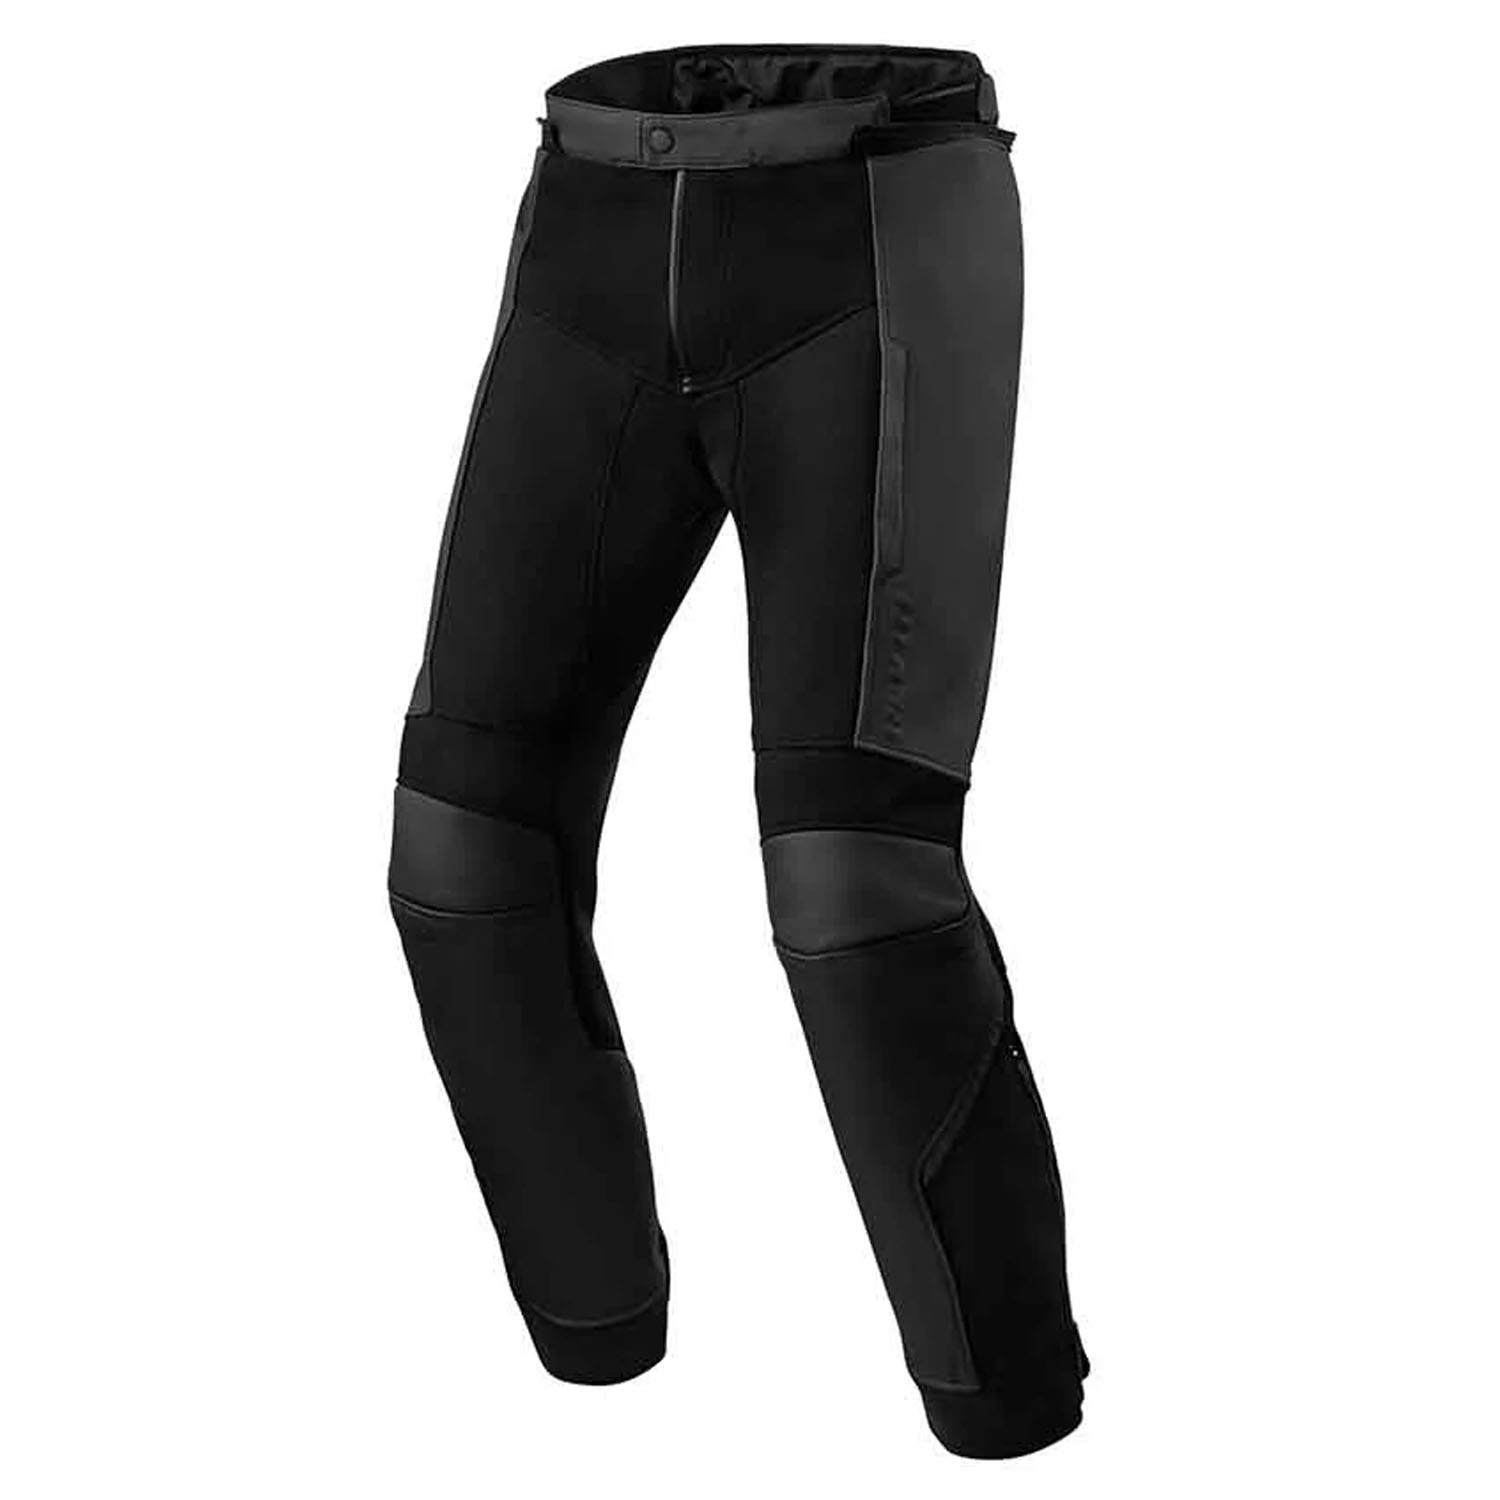 Image of REV'IT! Ignition 4 H2O Black Short Motorcycle Pants Size 50 ID 8700001359337